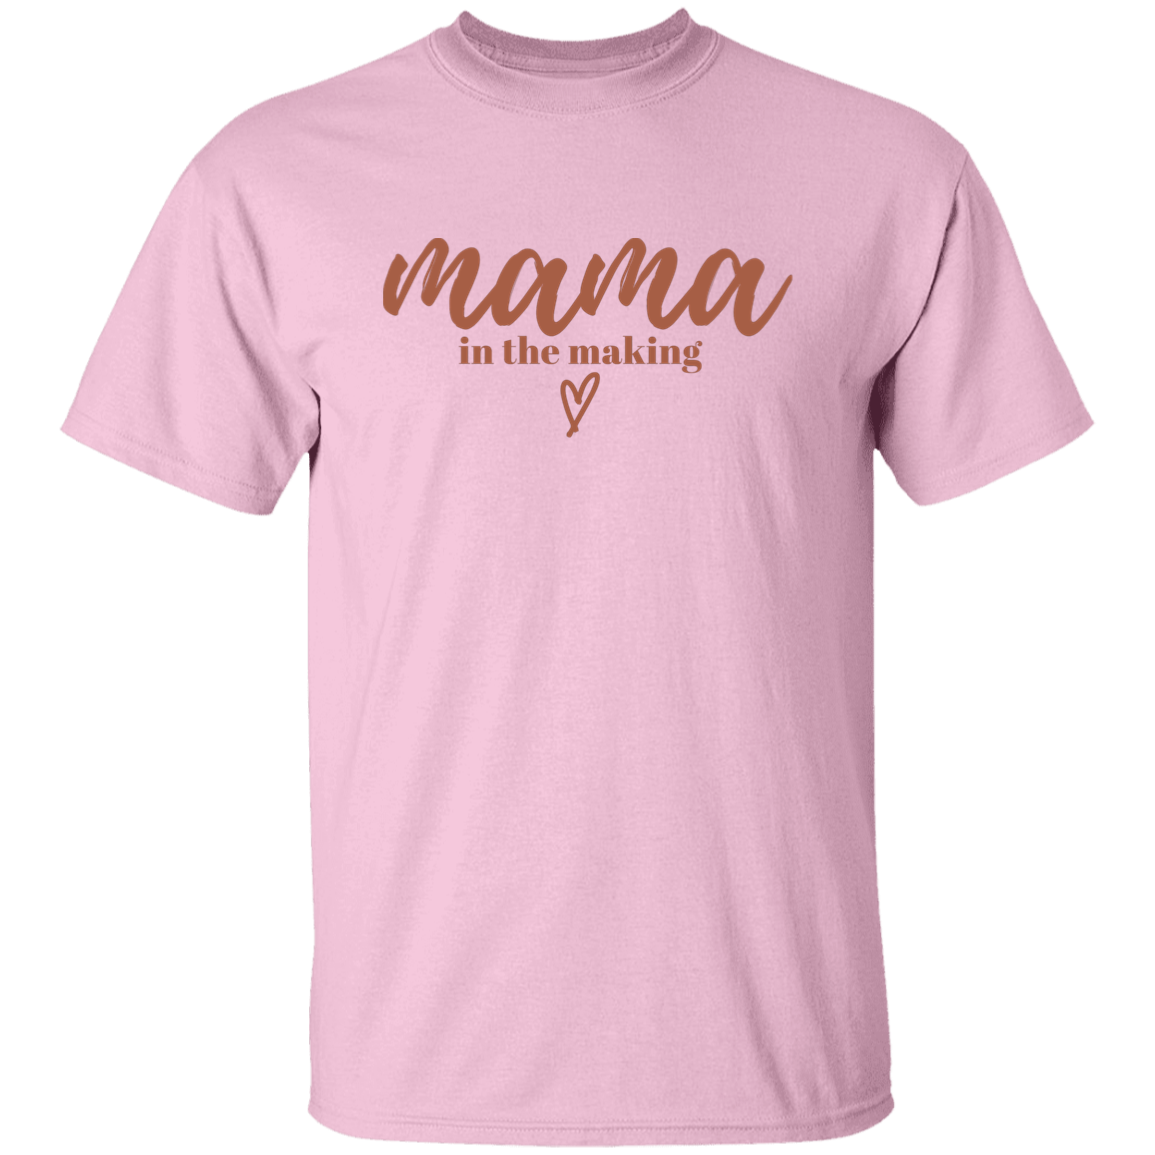 Mama in the making T-Shirt